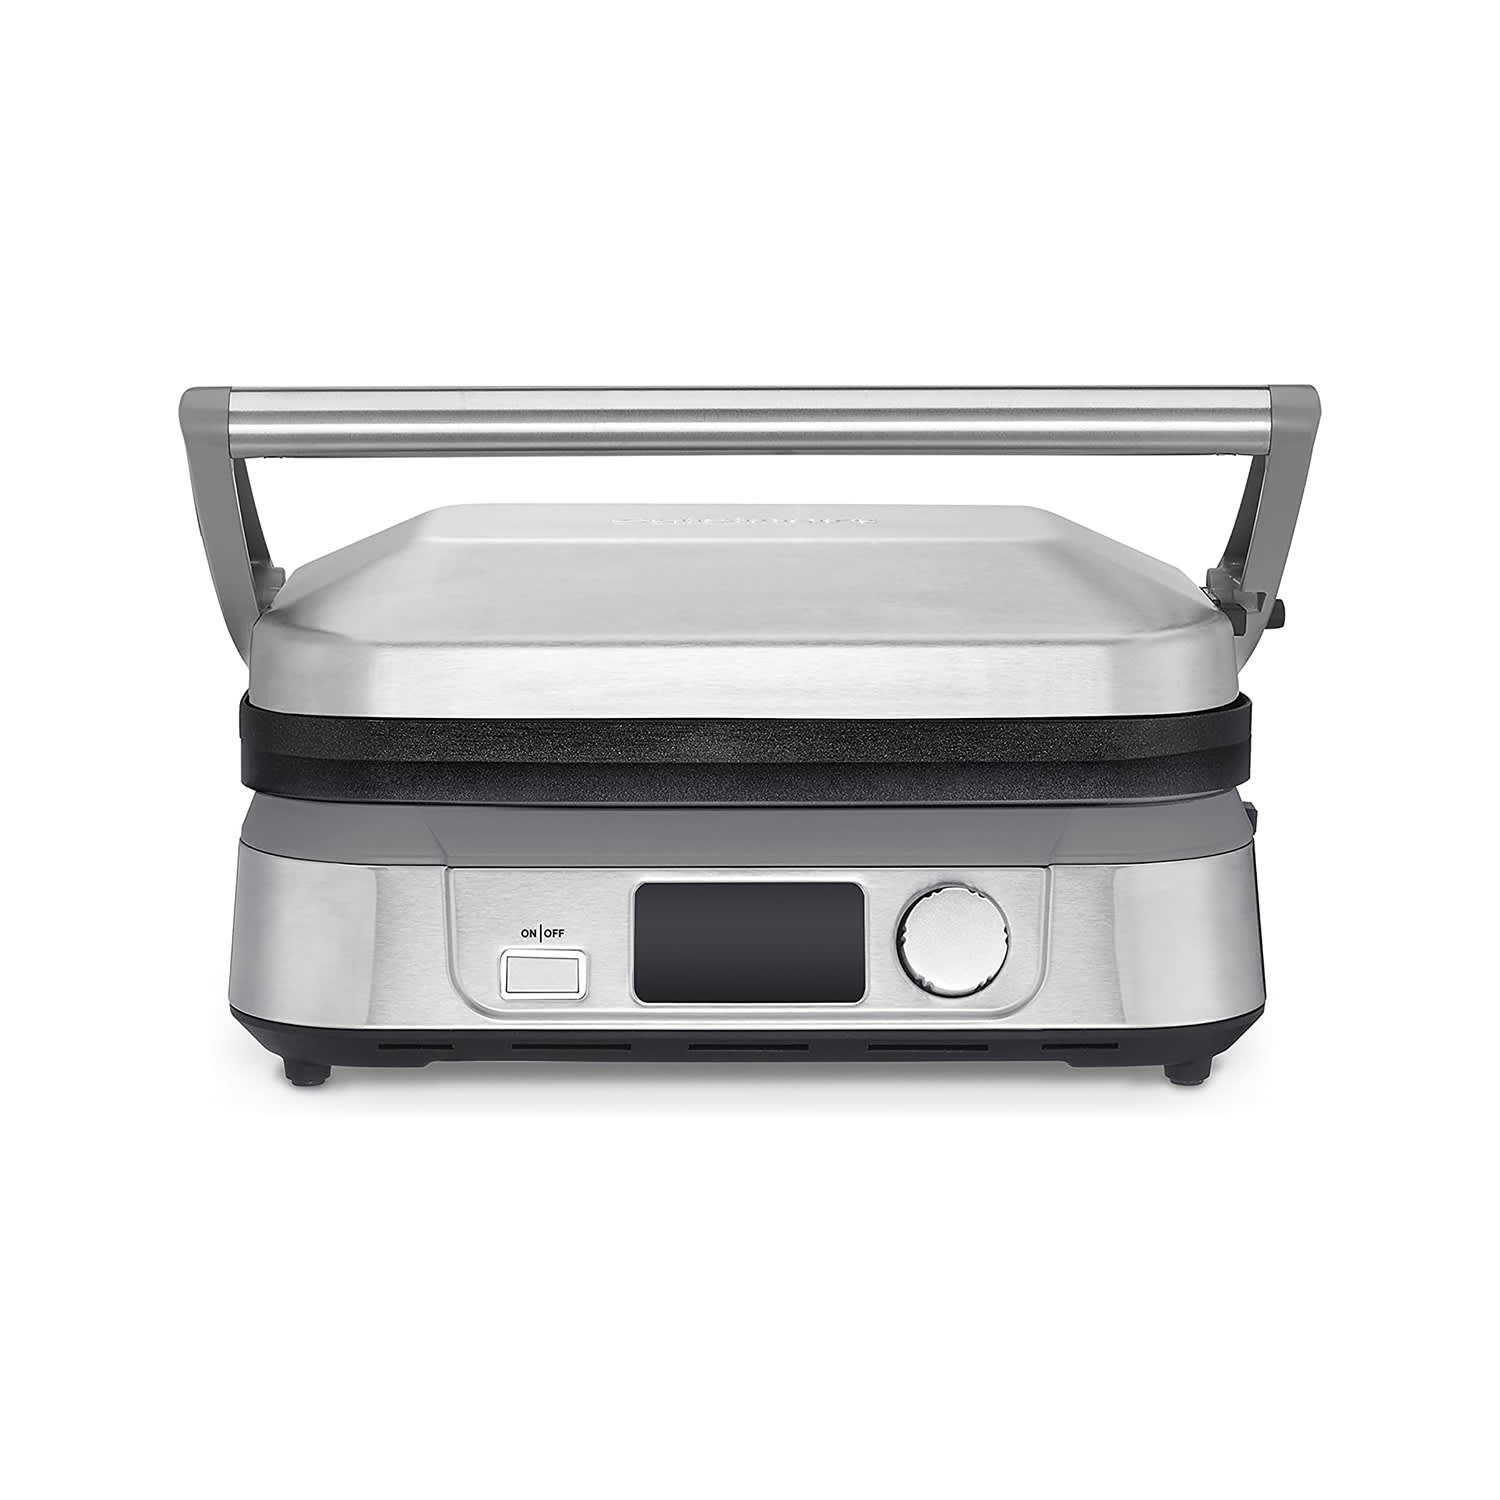 The 5 Best Panini Presses to Buy, According to Our Editors